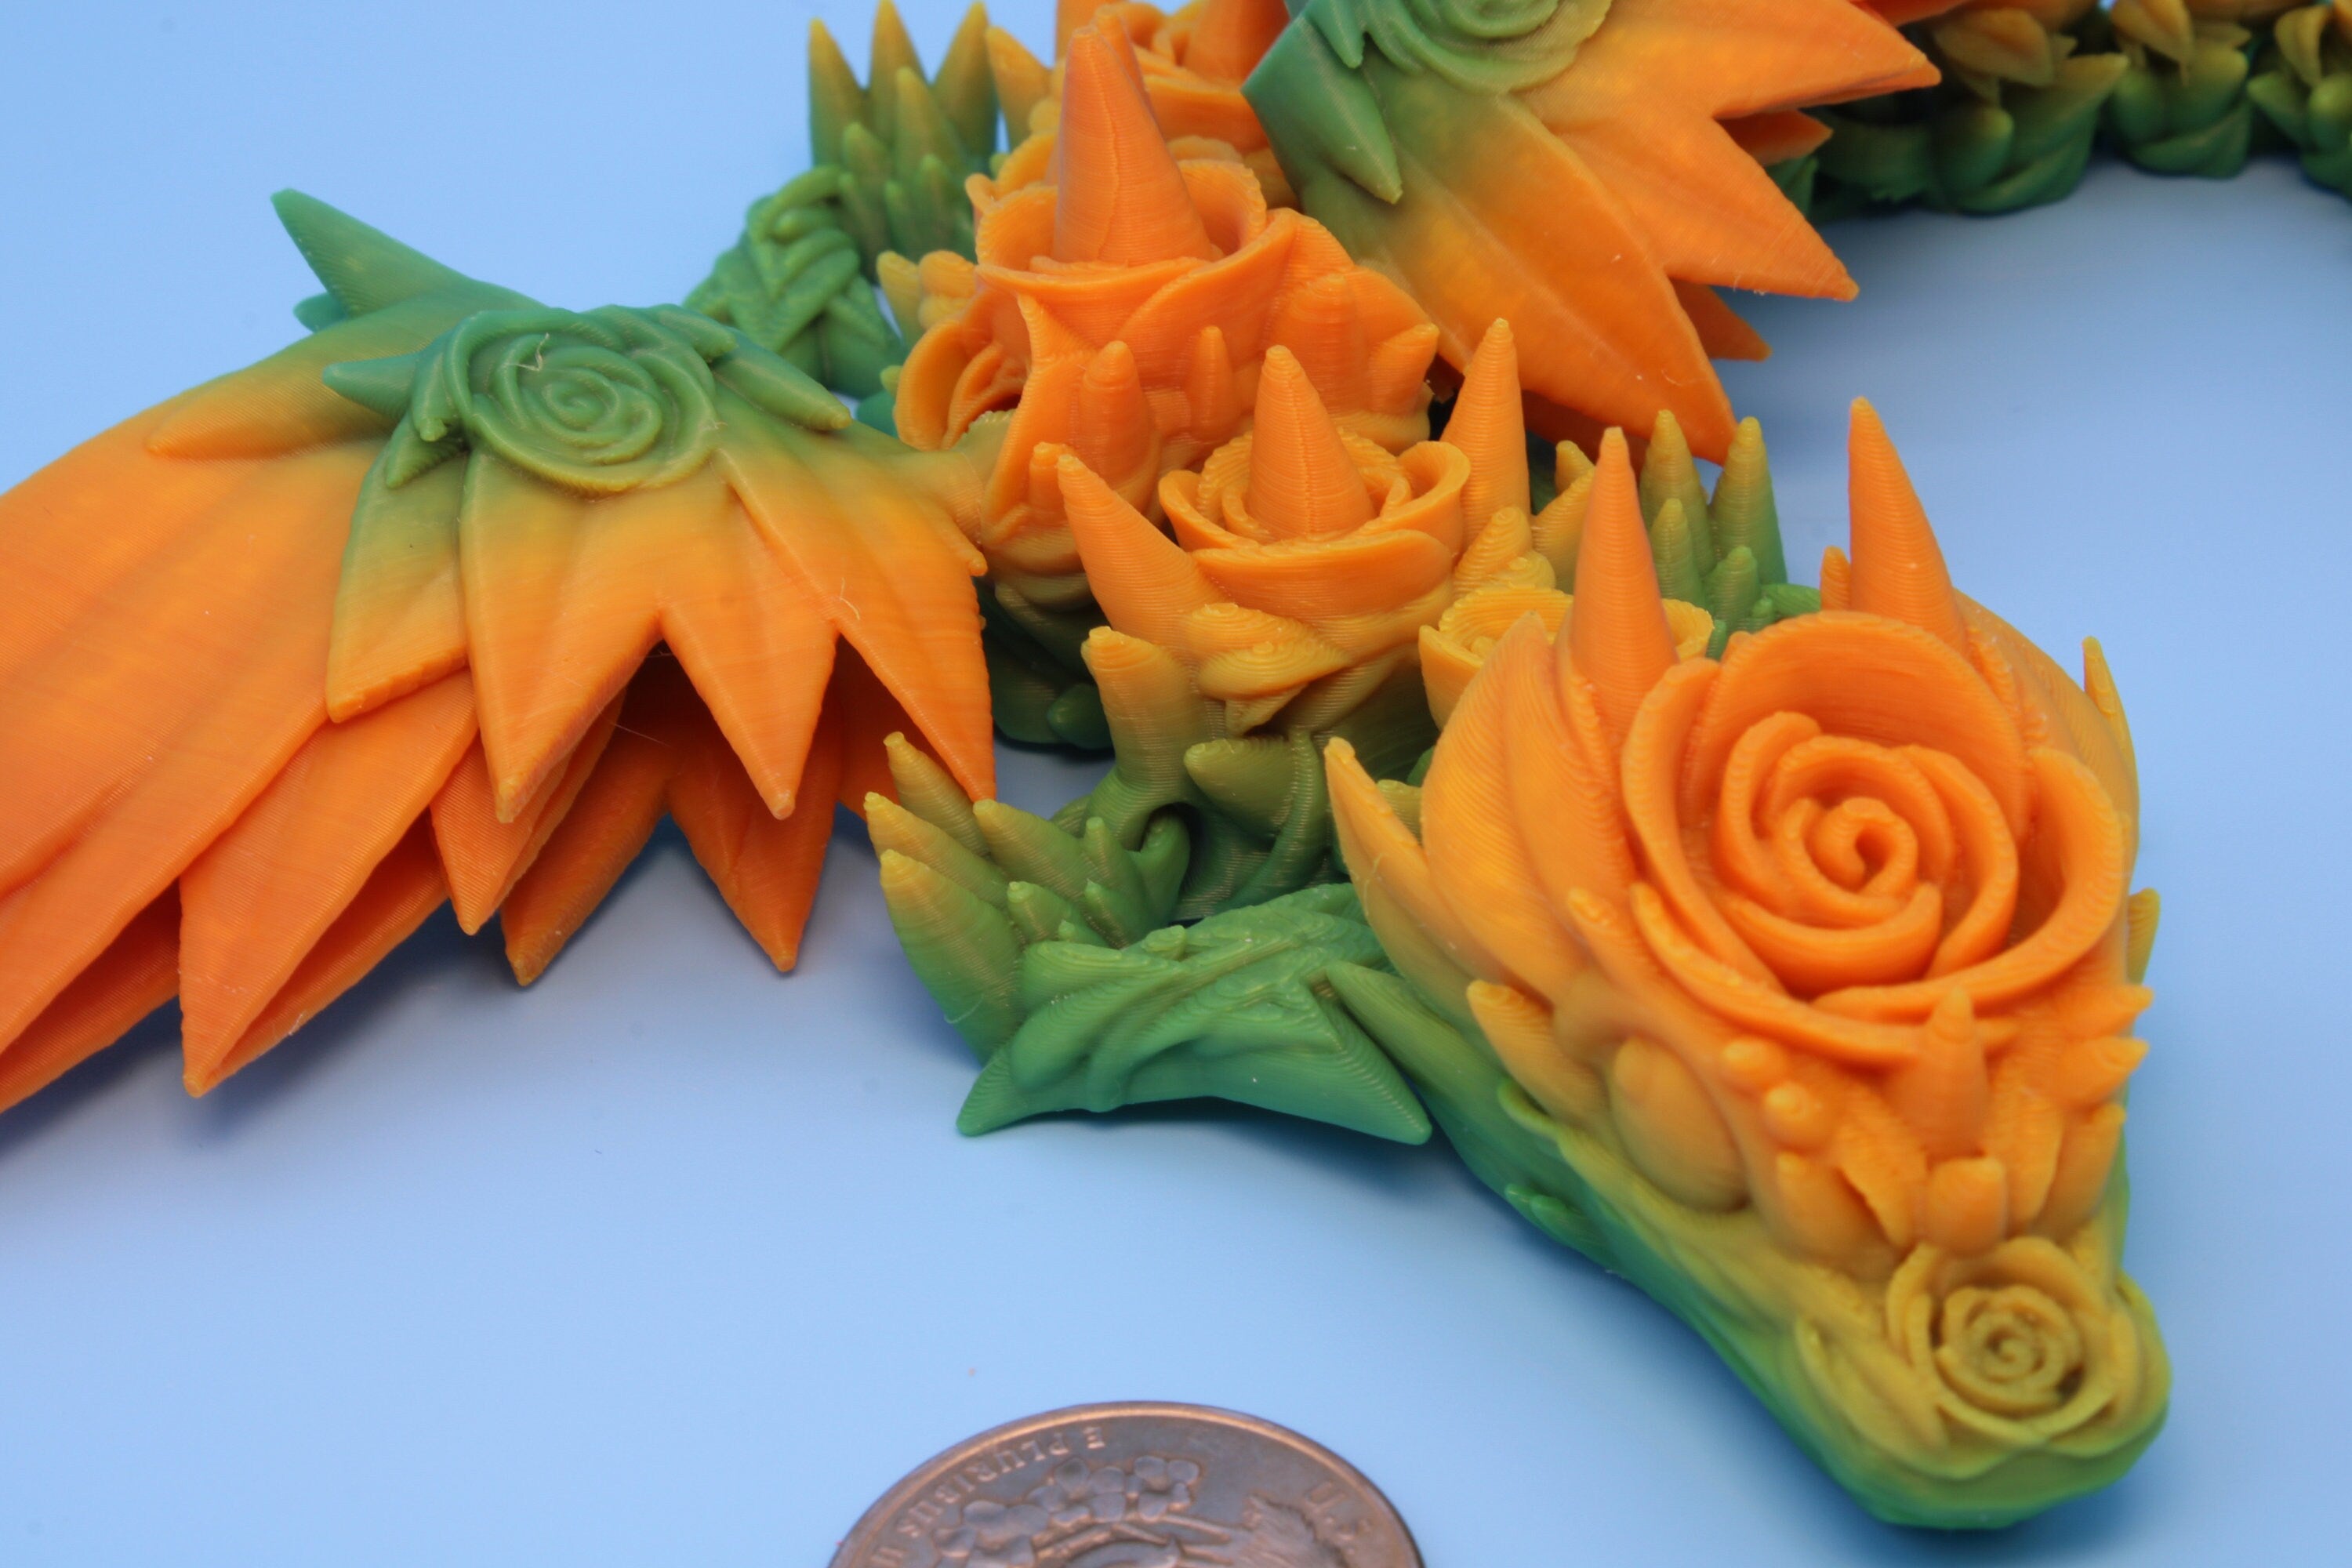 Baby Rose Wing Dragon | Yellow & Green | 3D Printed | Fidget | Flexi Toy 8.5 in. | Stress Relief Gift